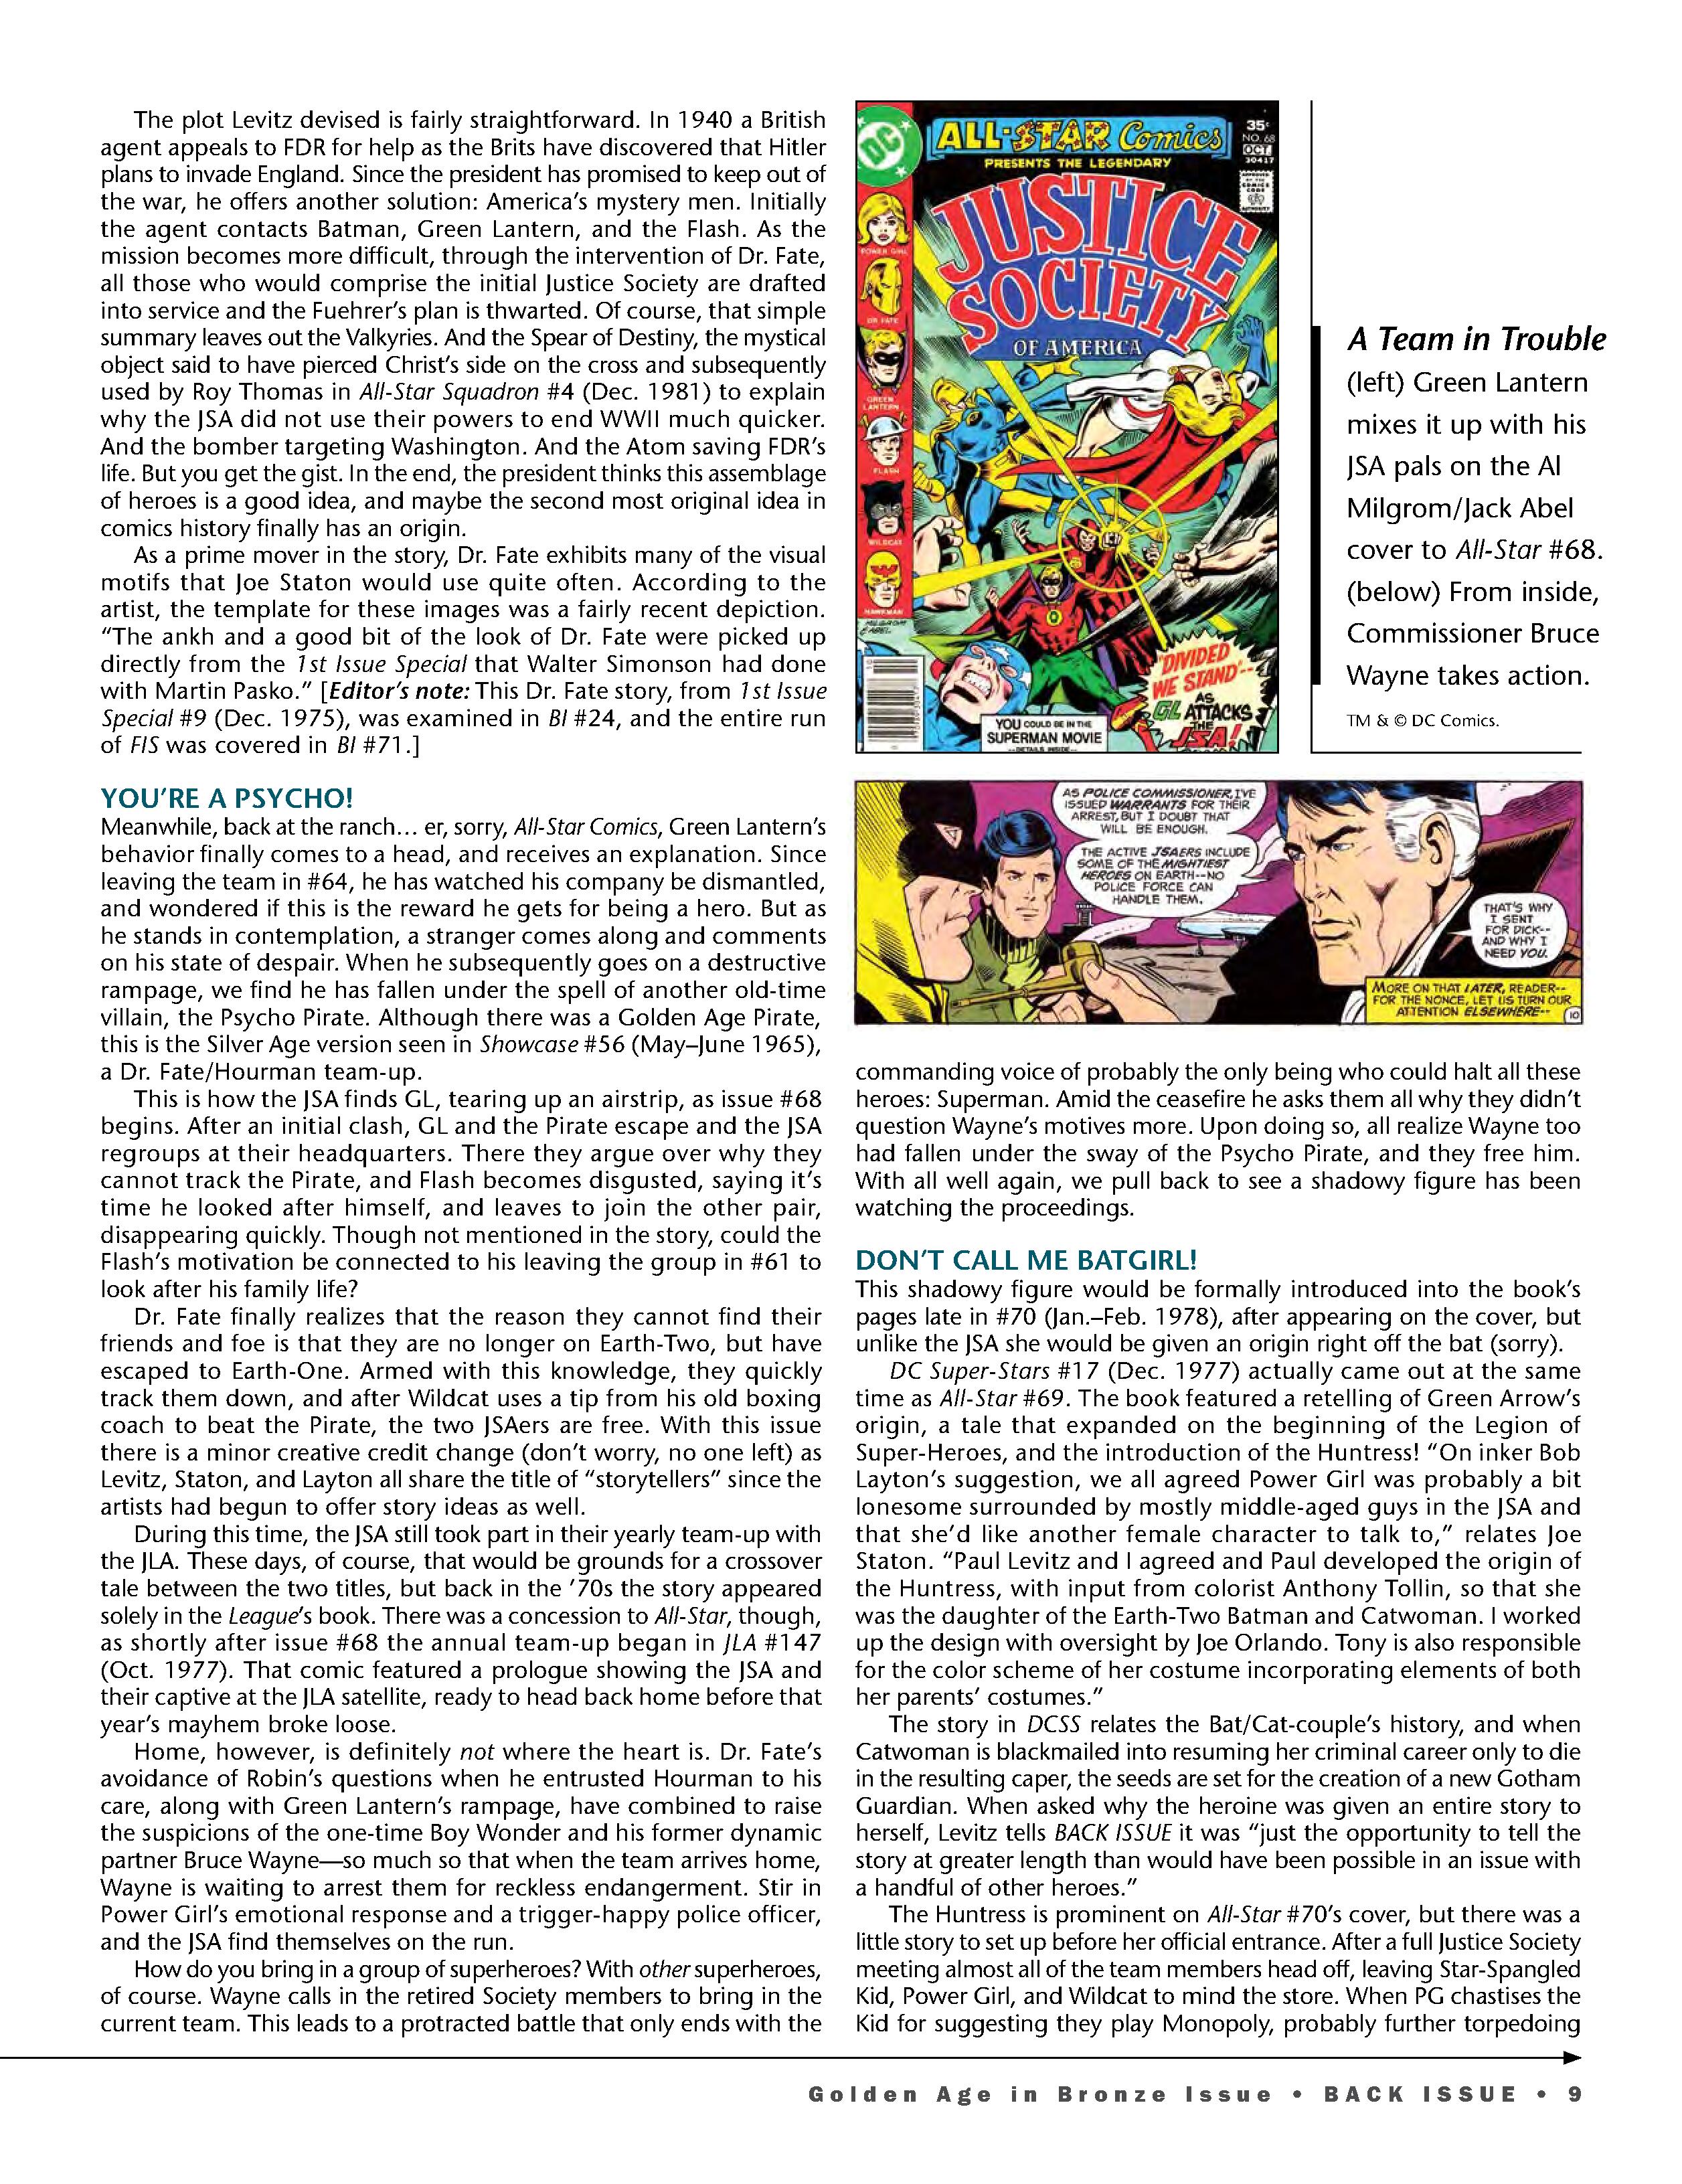 Read online Back Issue comic -  Issue #106 - 11